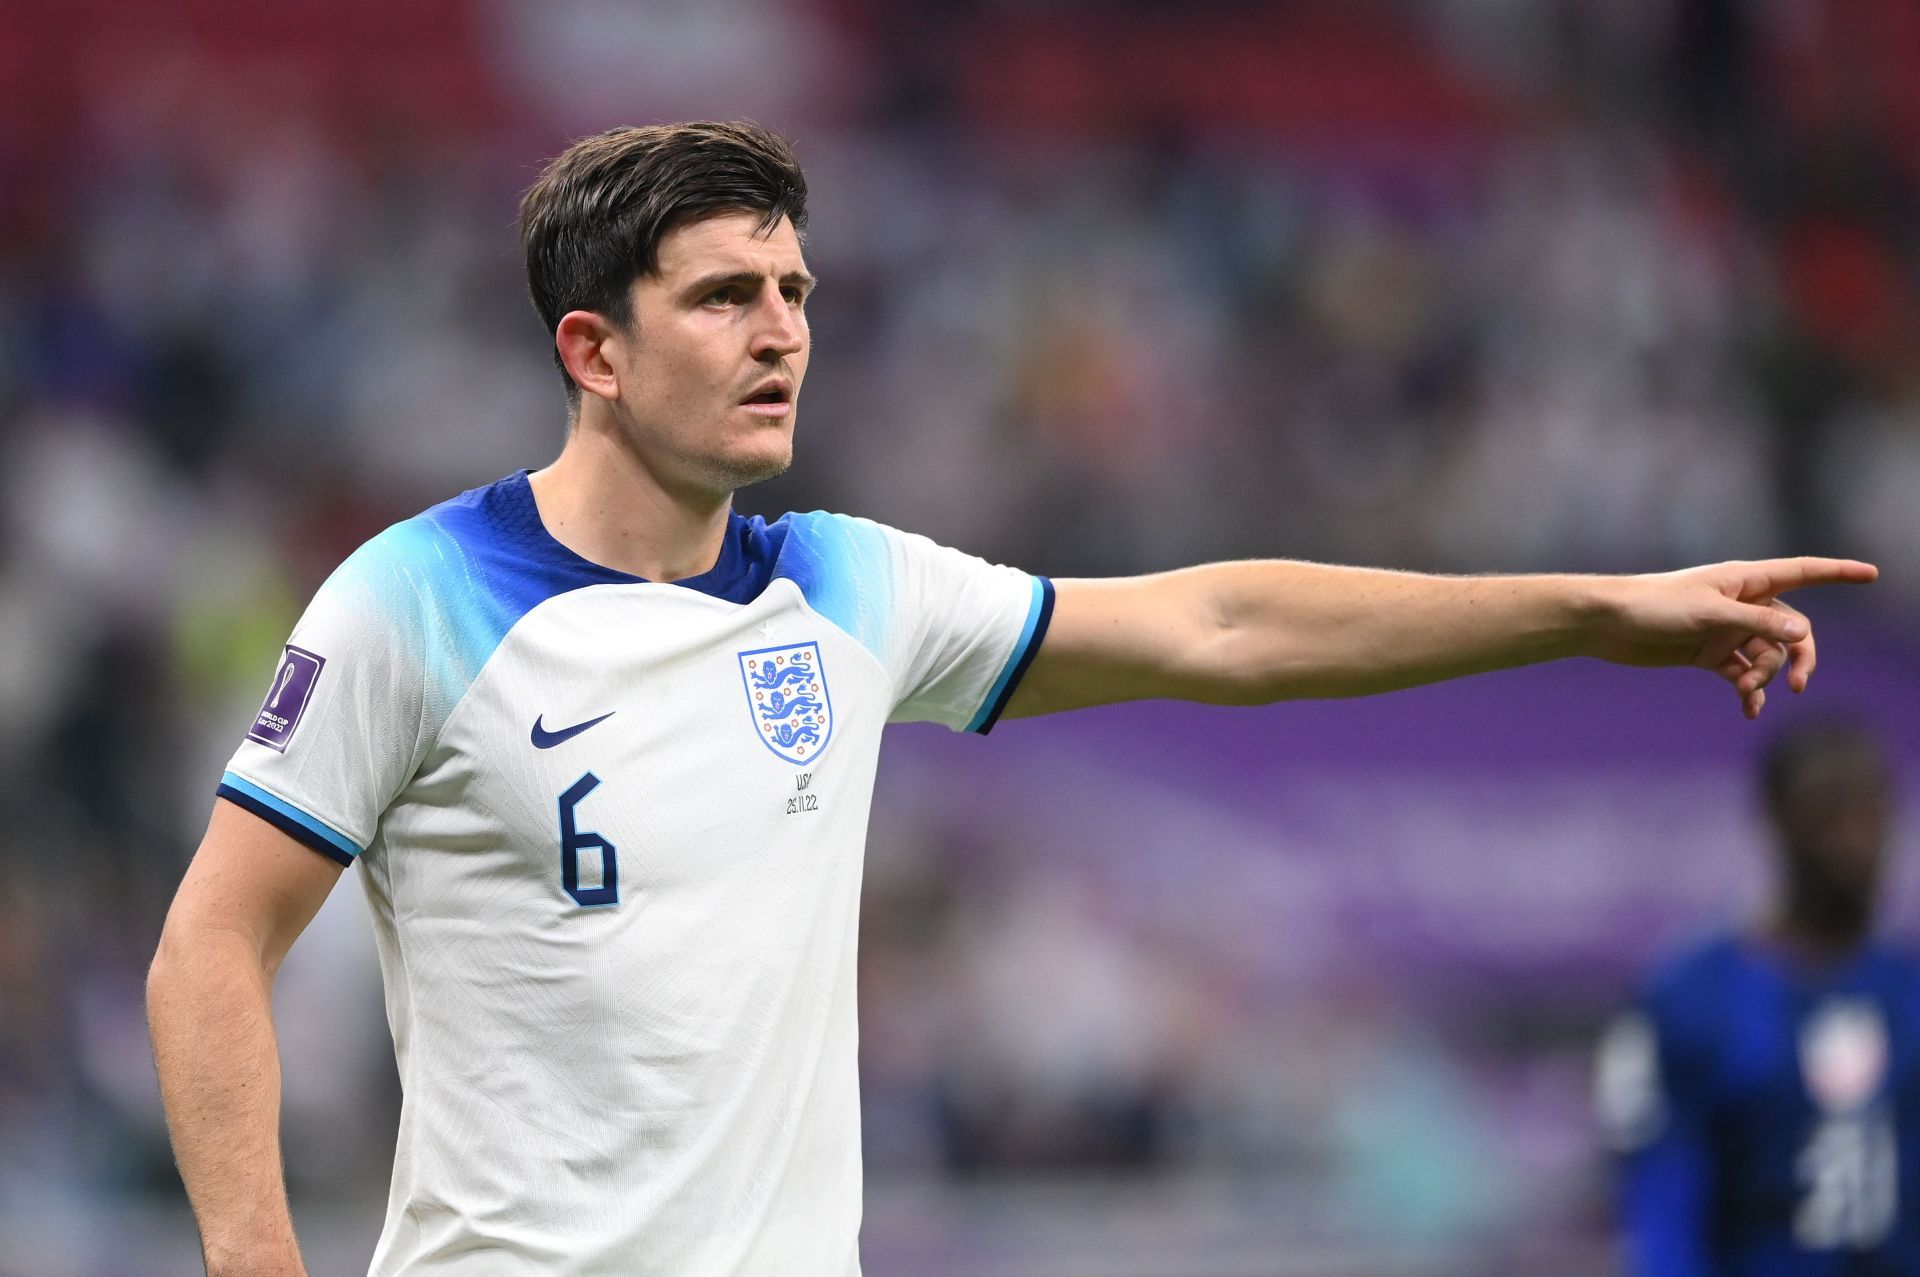 Maguire on how footballers are percieved